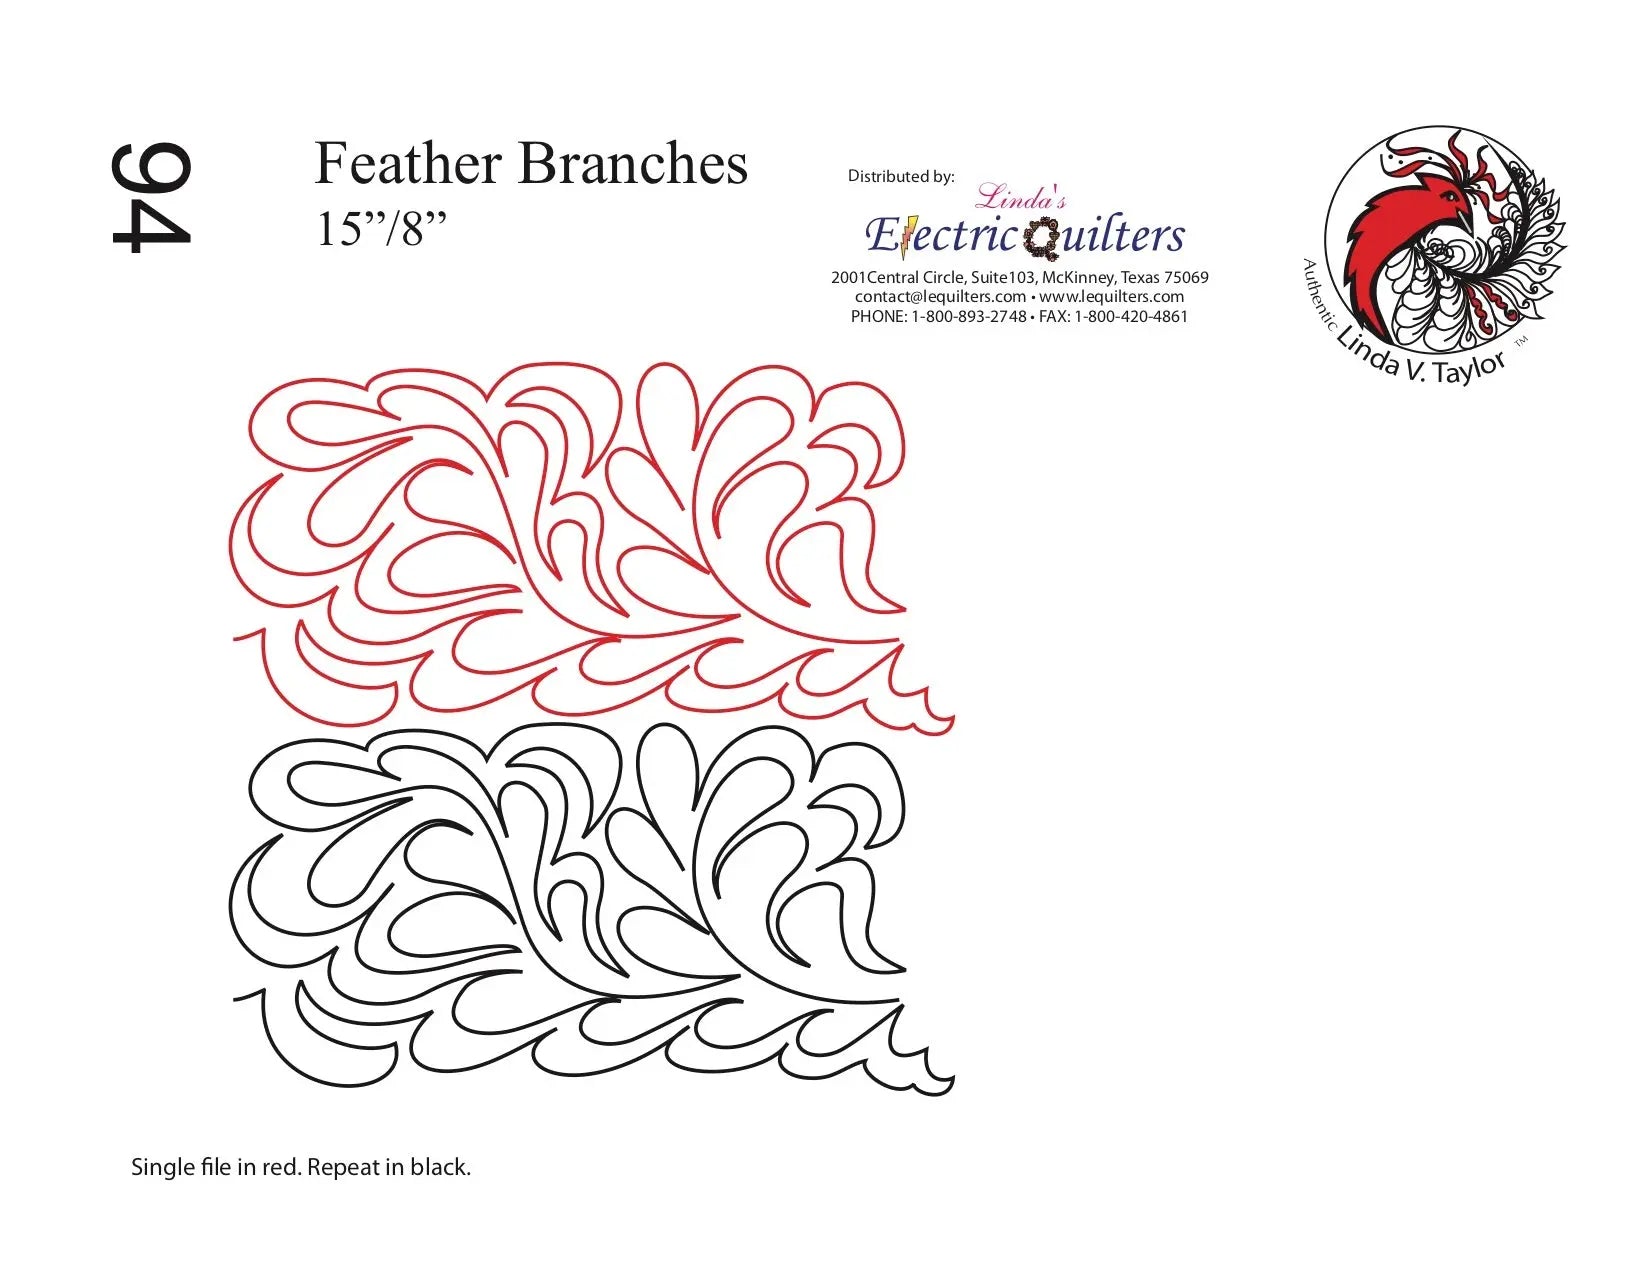 094 Feather Branches Pantograph by Linda V. Taylor